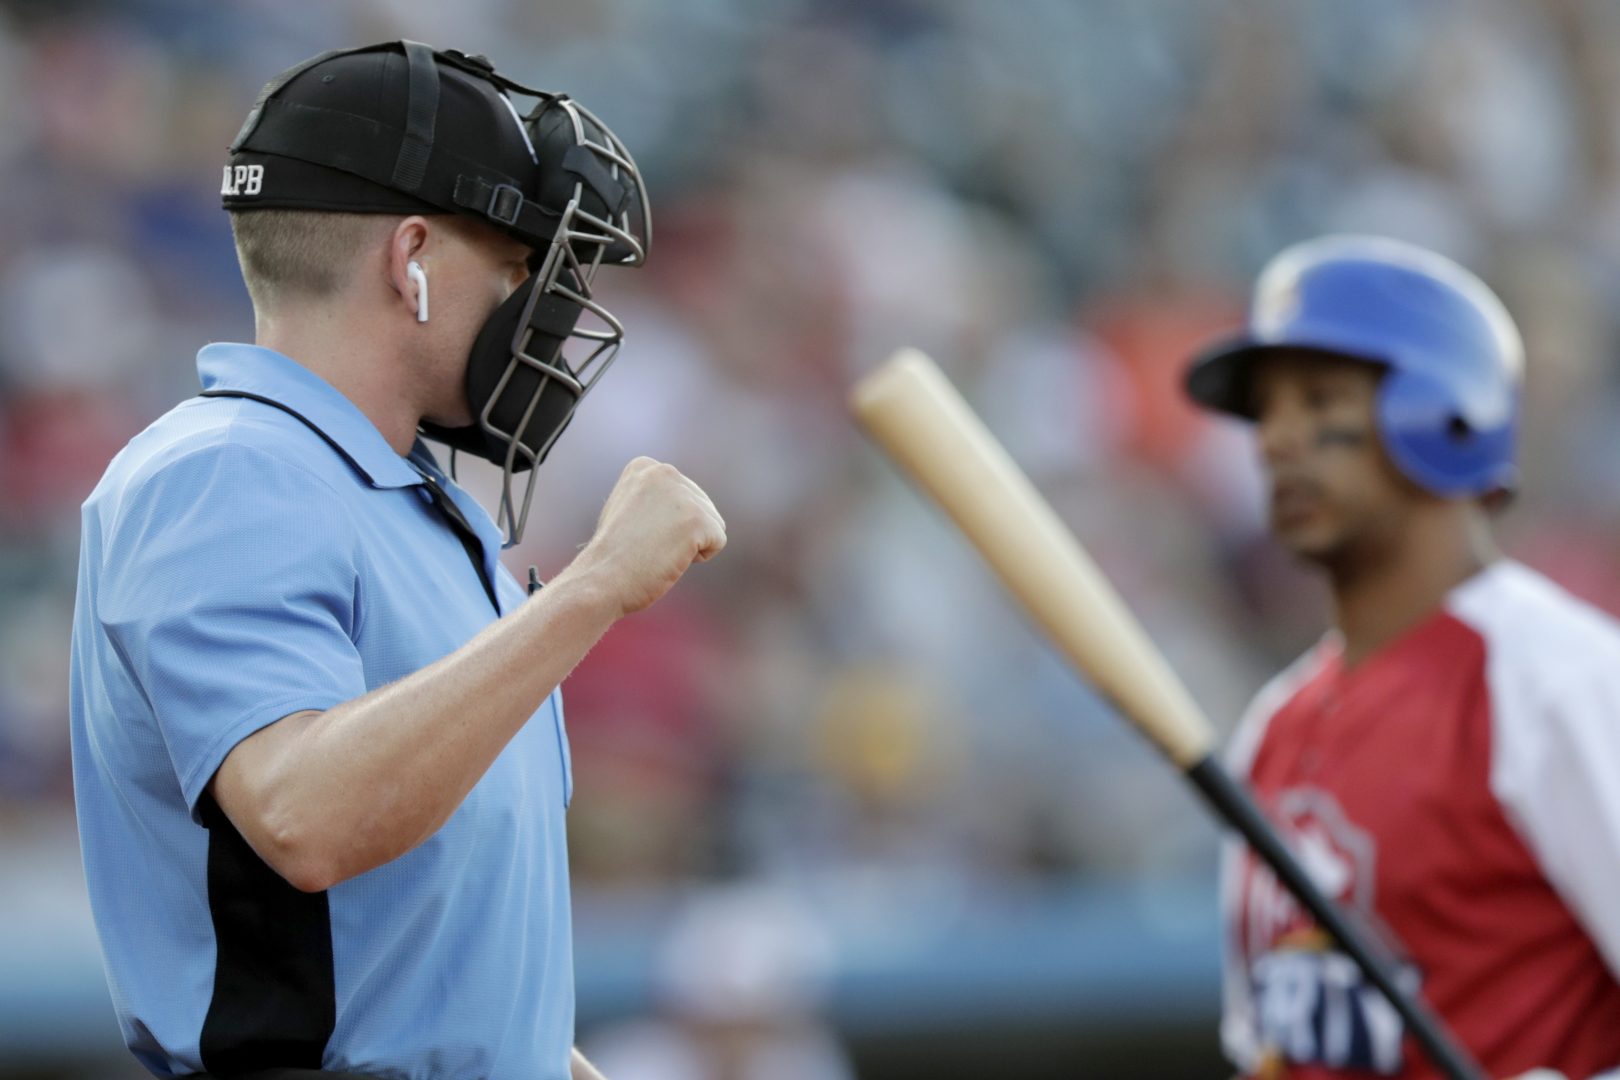 Home plate umpire Brian deBrauwere, left, calls a strike given to him by a radar system over an earpiece as Liberty Division's Tyler Ladendorf, right, of the High Point Rockers, strikes out to Freedom Division's Mitch Atkins, of the York Revolution, during the first inning of the Atlantic League All-Star minor league baseball game, Wednesday, July 10, 2019, in York, Pa. deBrauwere wore the earpiece connected to an iPhone in his ball bag which relayed ball and strike calls upon receiving it from a TrackMan computer system that uses Doppler radar. The independent Atlantic League became the first American professional baseball league to let the computer call balls and strikes during the all star game. 